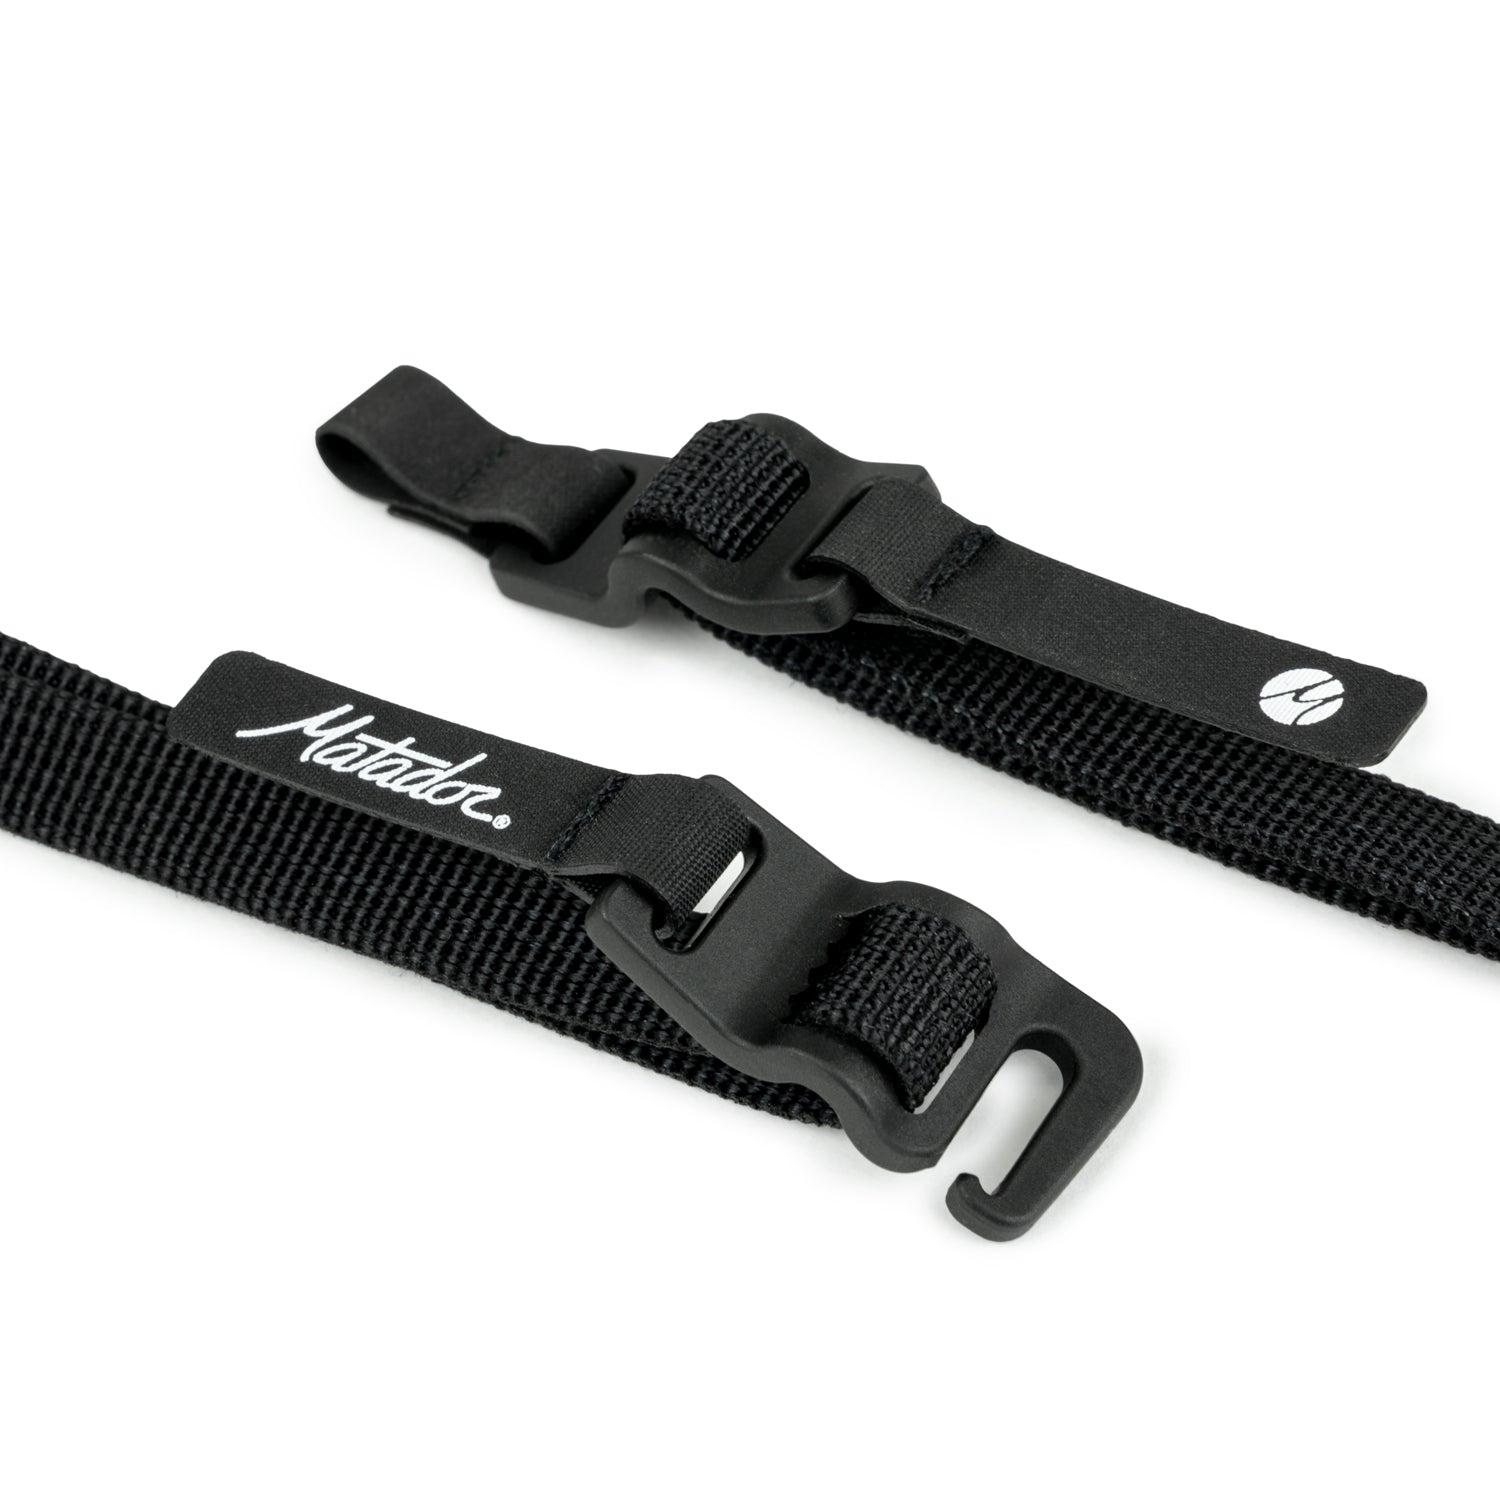 Better Tether Gear Straps 2-Pack